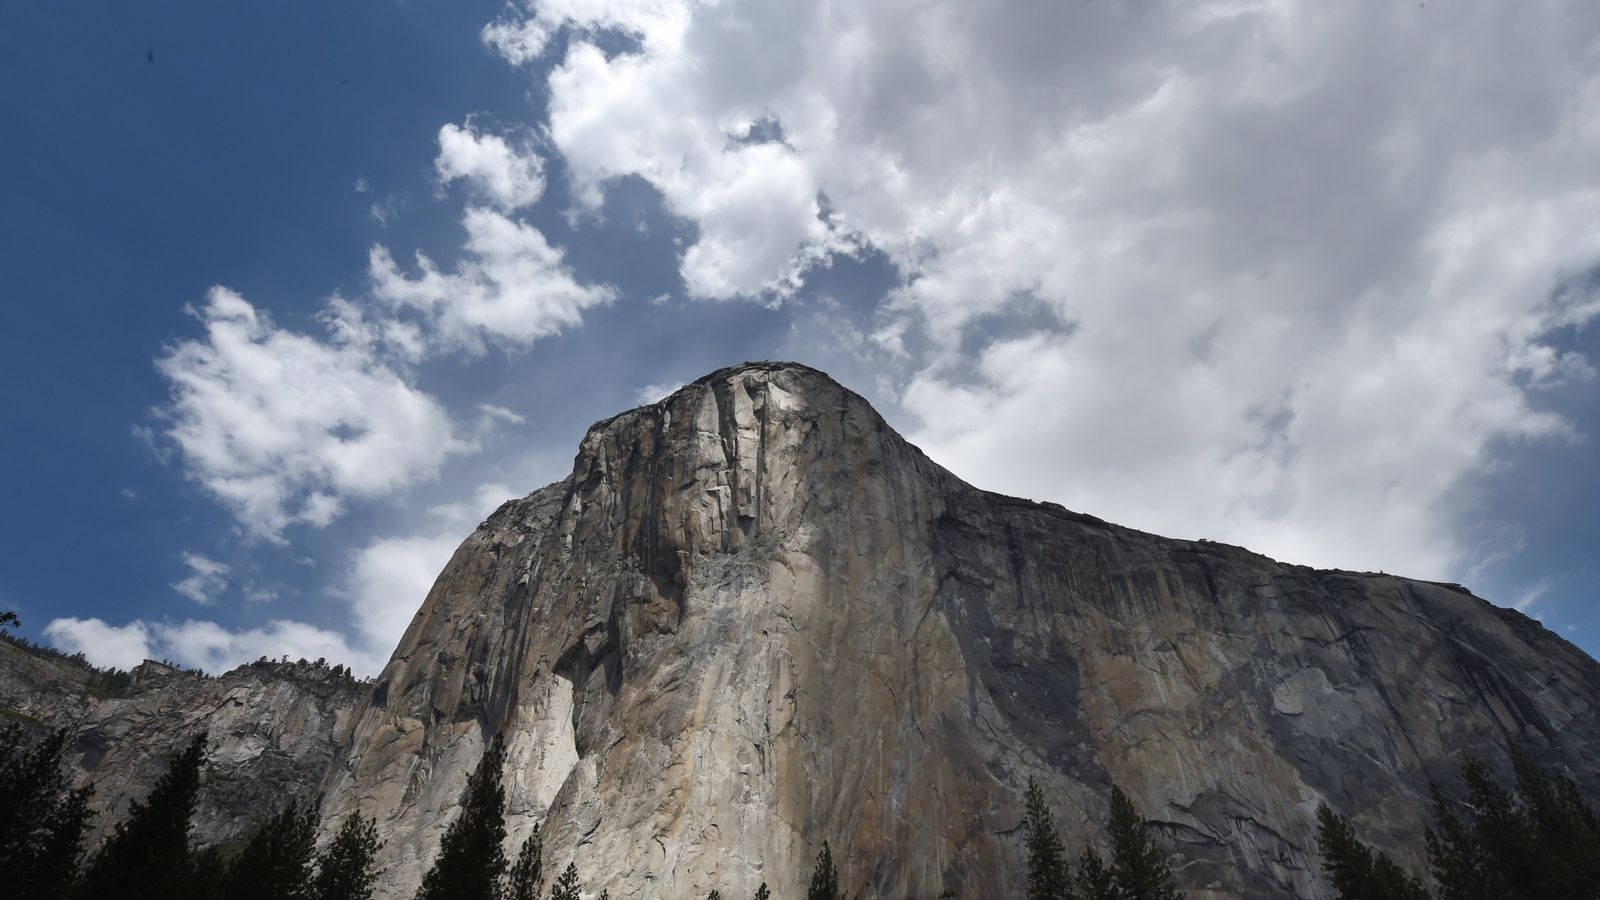 Two climbers fall to their deaths from Yosemite's El Capitan US News